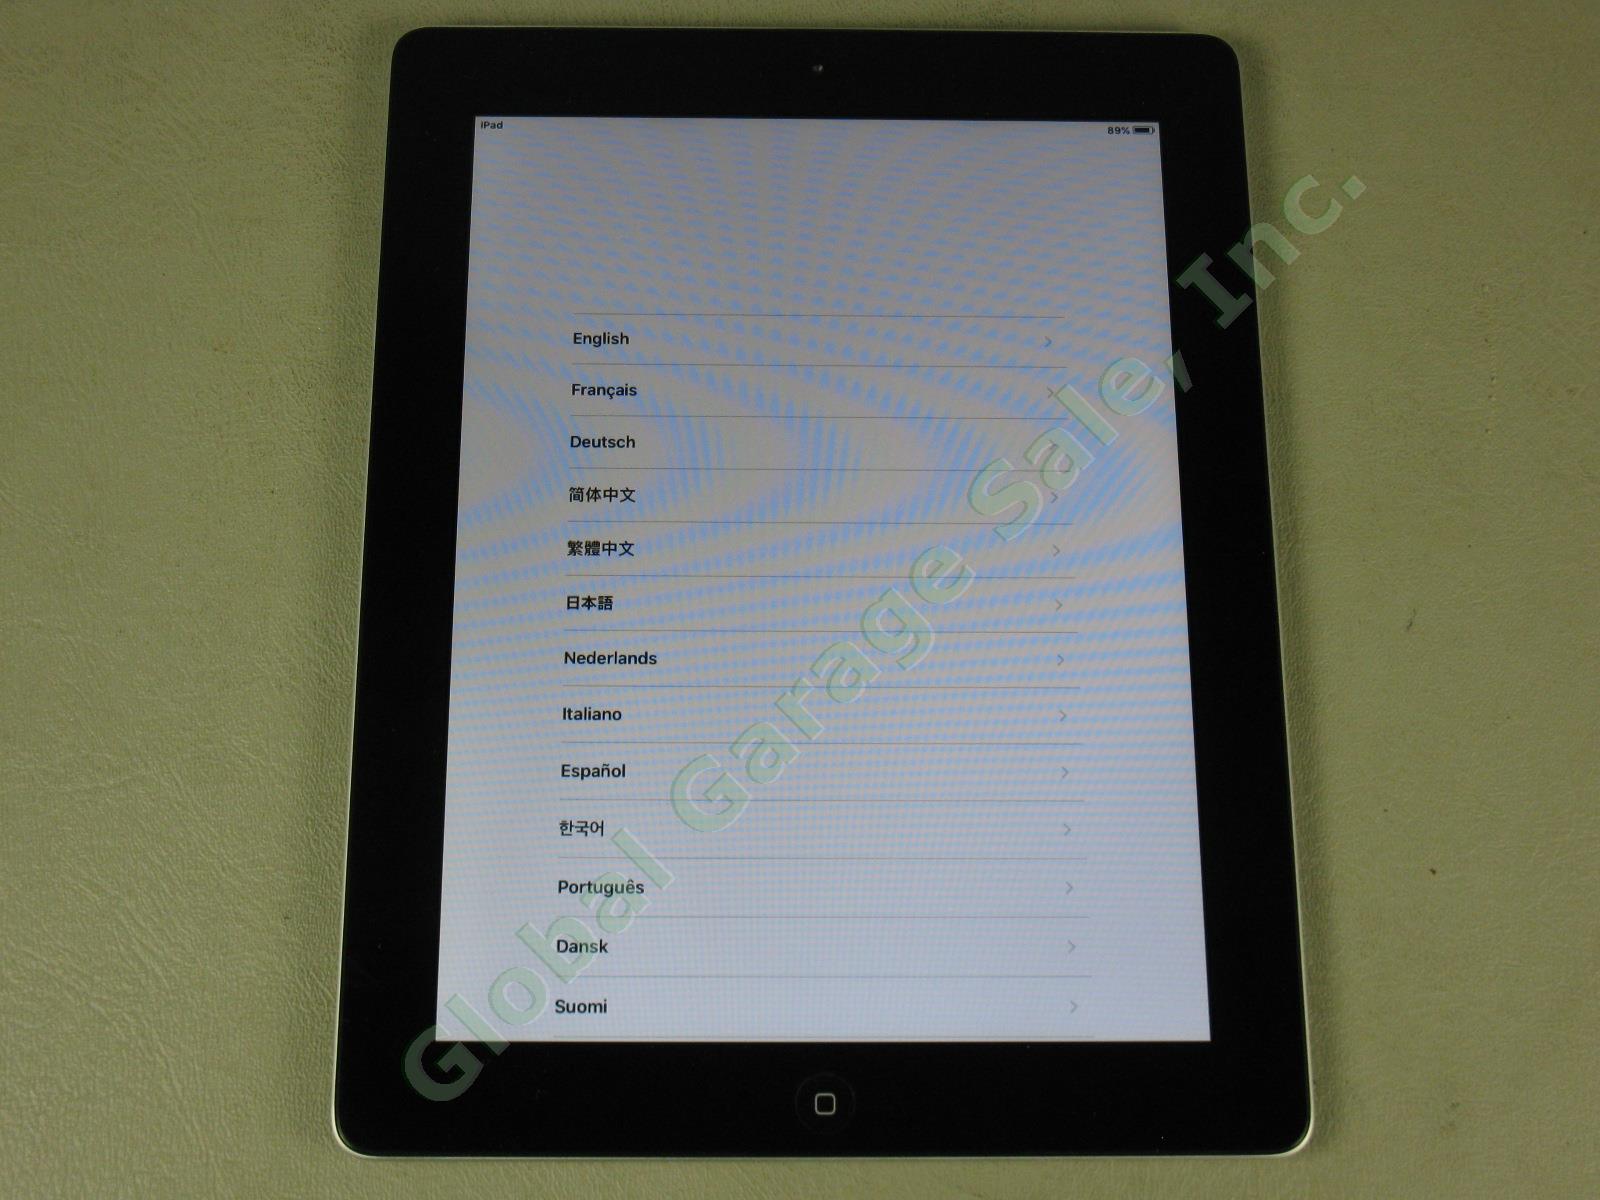 Apple iPad 2 Black Tablet 16GB Wifi Works Great MC770LL/A A1395 NO RESERVE PRICE 2